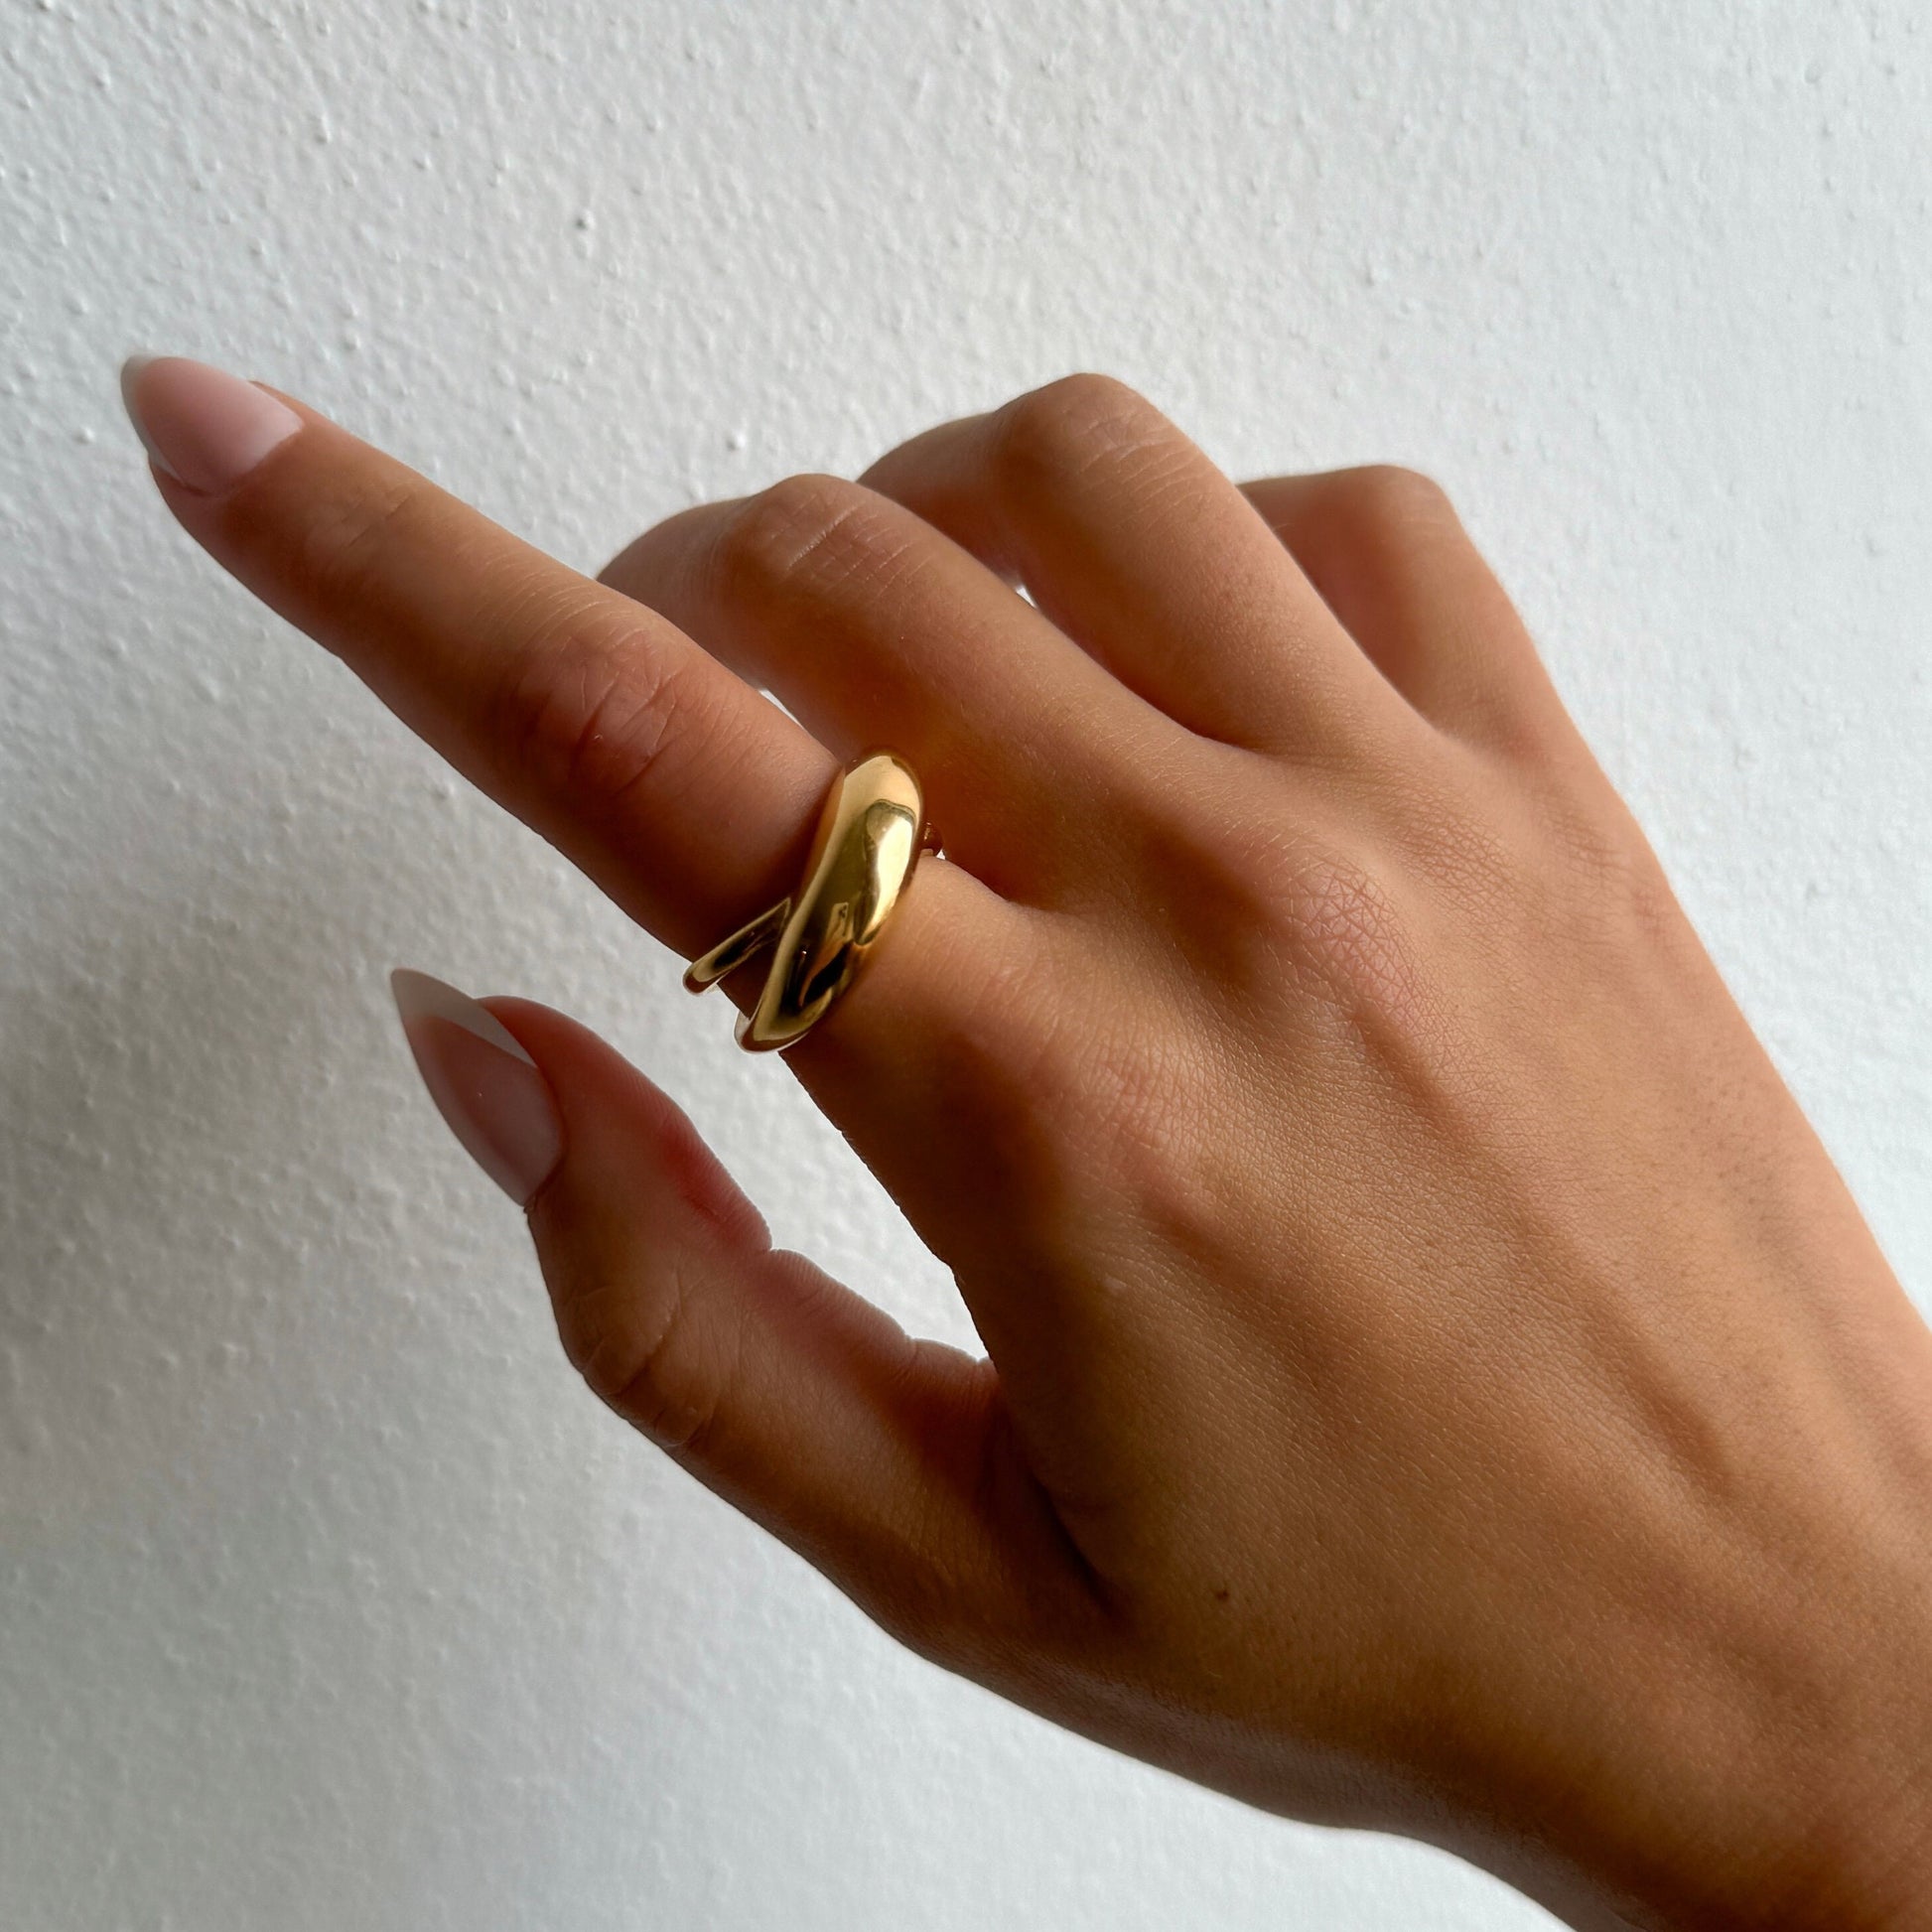 Minimalist dome ring, irregular dome ring, chunky gold ring, statement ring, stackable ring, gift for her, chunky ring gold filled ring dome